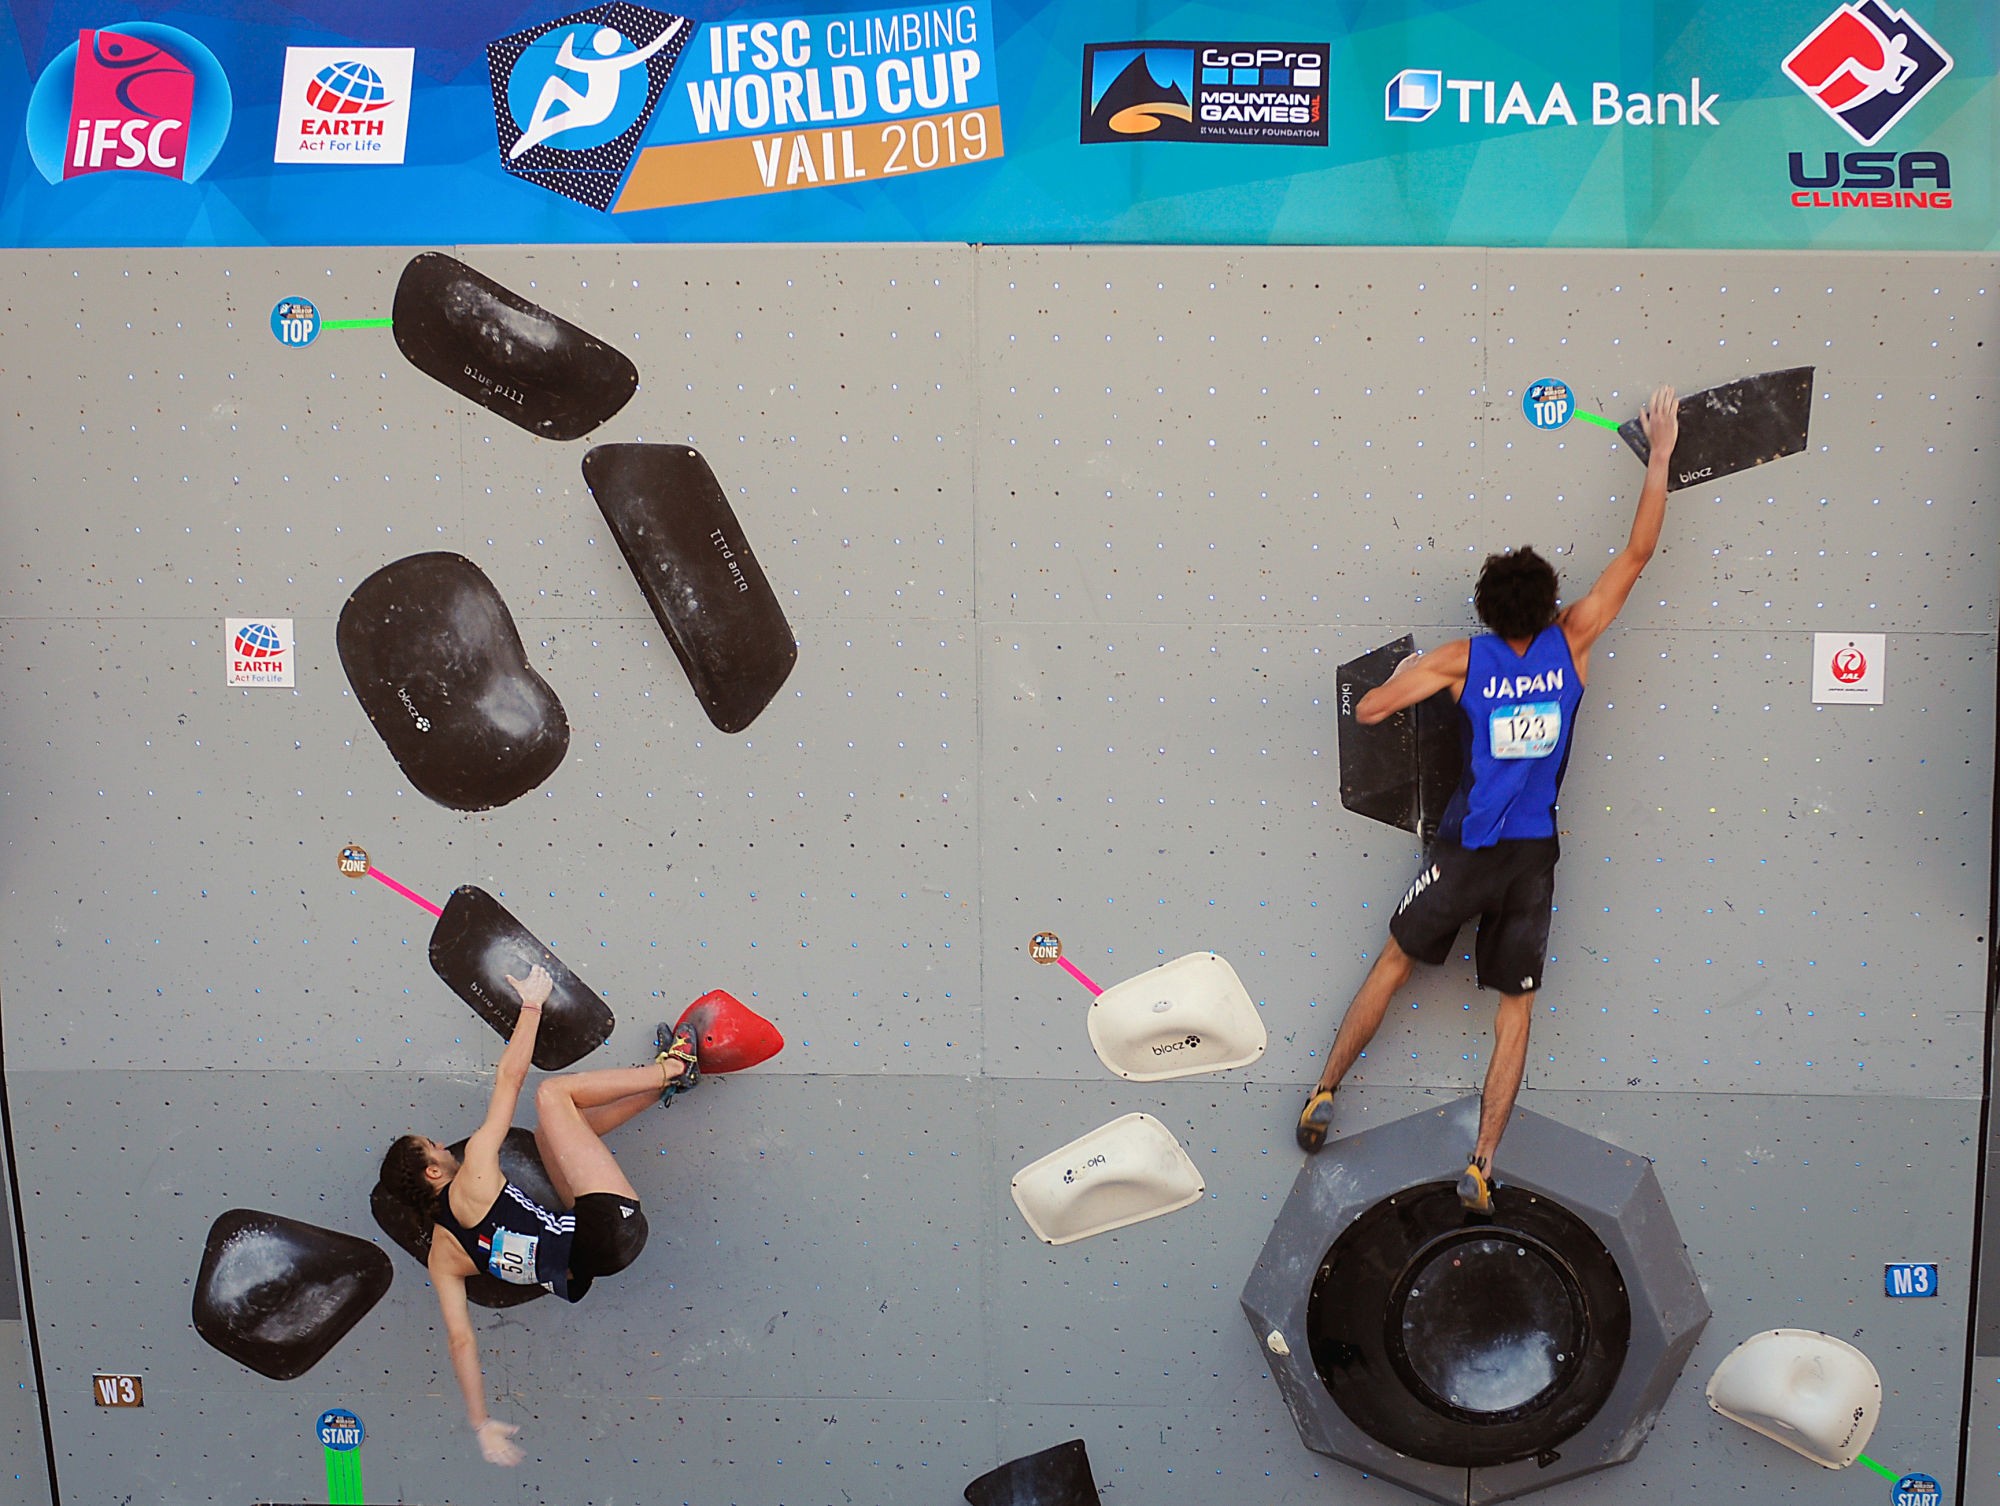 June 8, 2019: France's, Luce Douady #50, and Japan's, Meichi Narasaki #123, in IFSC World Cup climbing competition during the GoPro Mountain Games. Adventure athletes from around the world gather in Vail, Colorado each summer for North America's largest celebration of adventure sports competition, art, and music. Vail, Colorado. 
Photo : Icon Sport